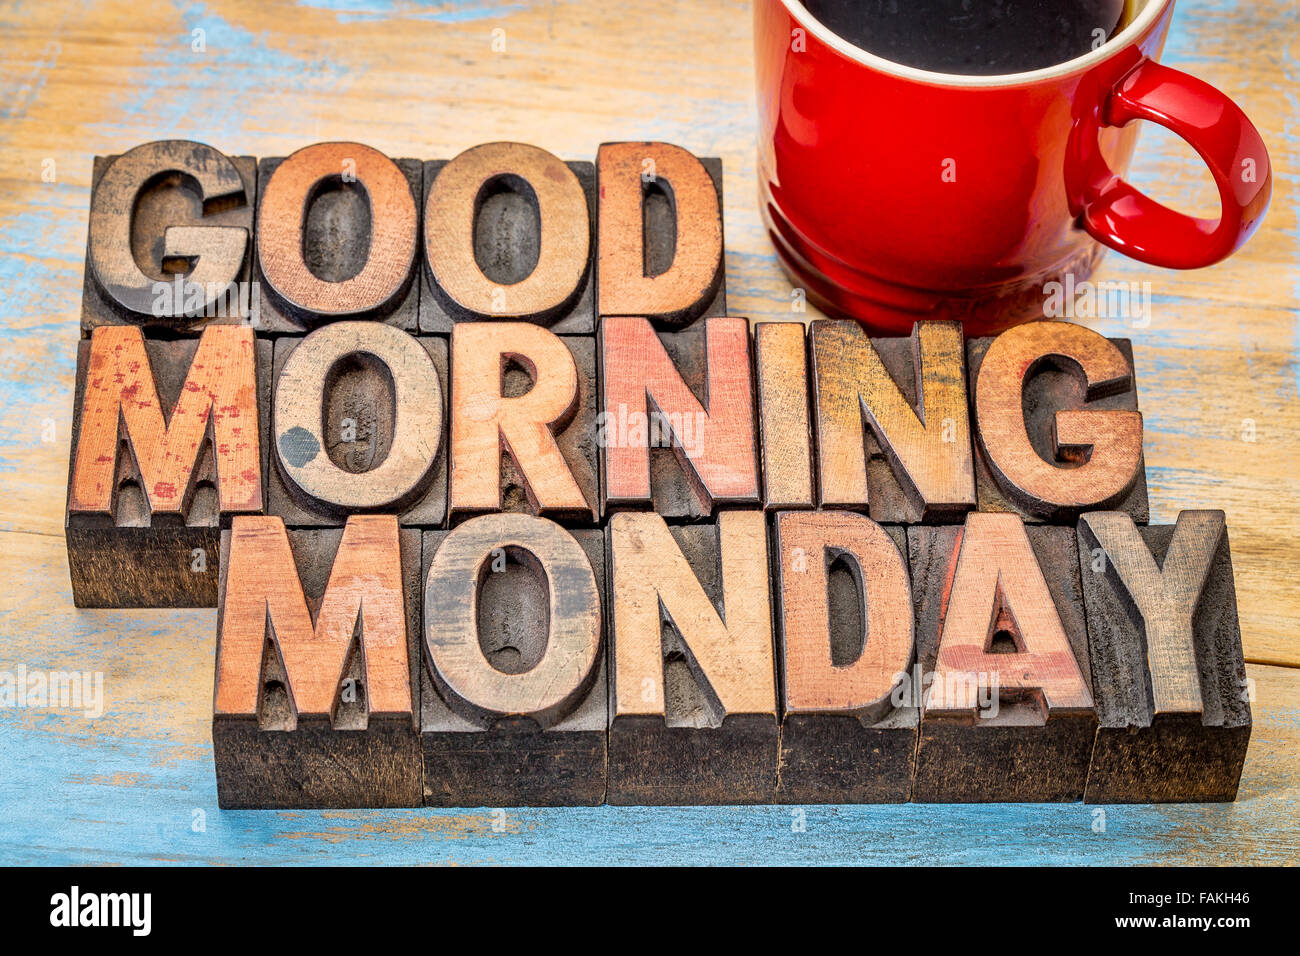 Good morning Monday in vintage letterpress wood type blocks with a cup of coffee Stock Photo